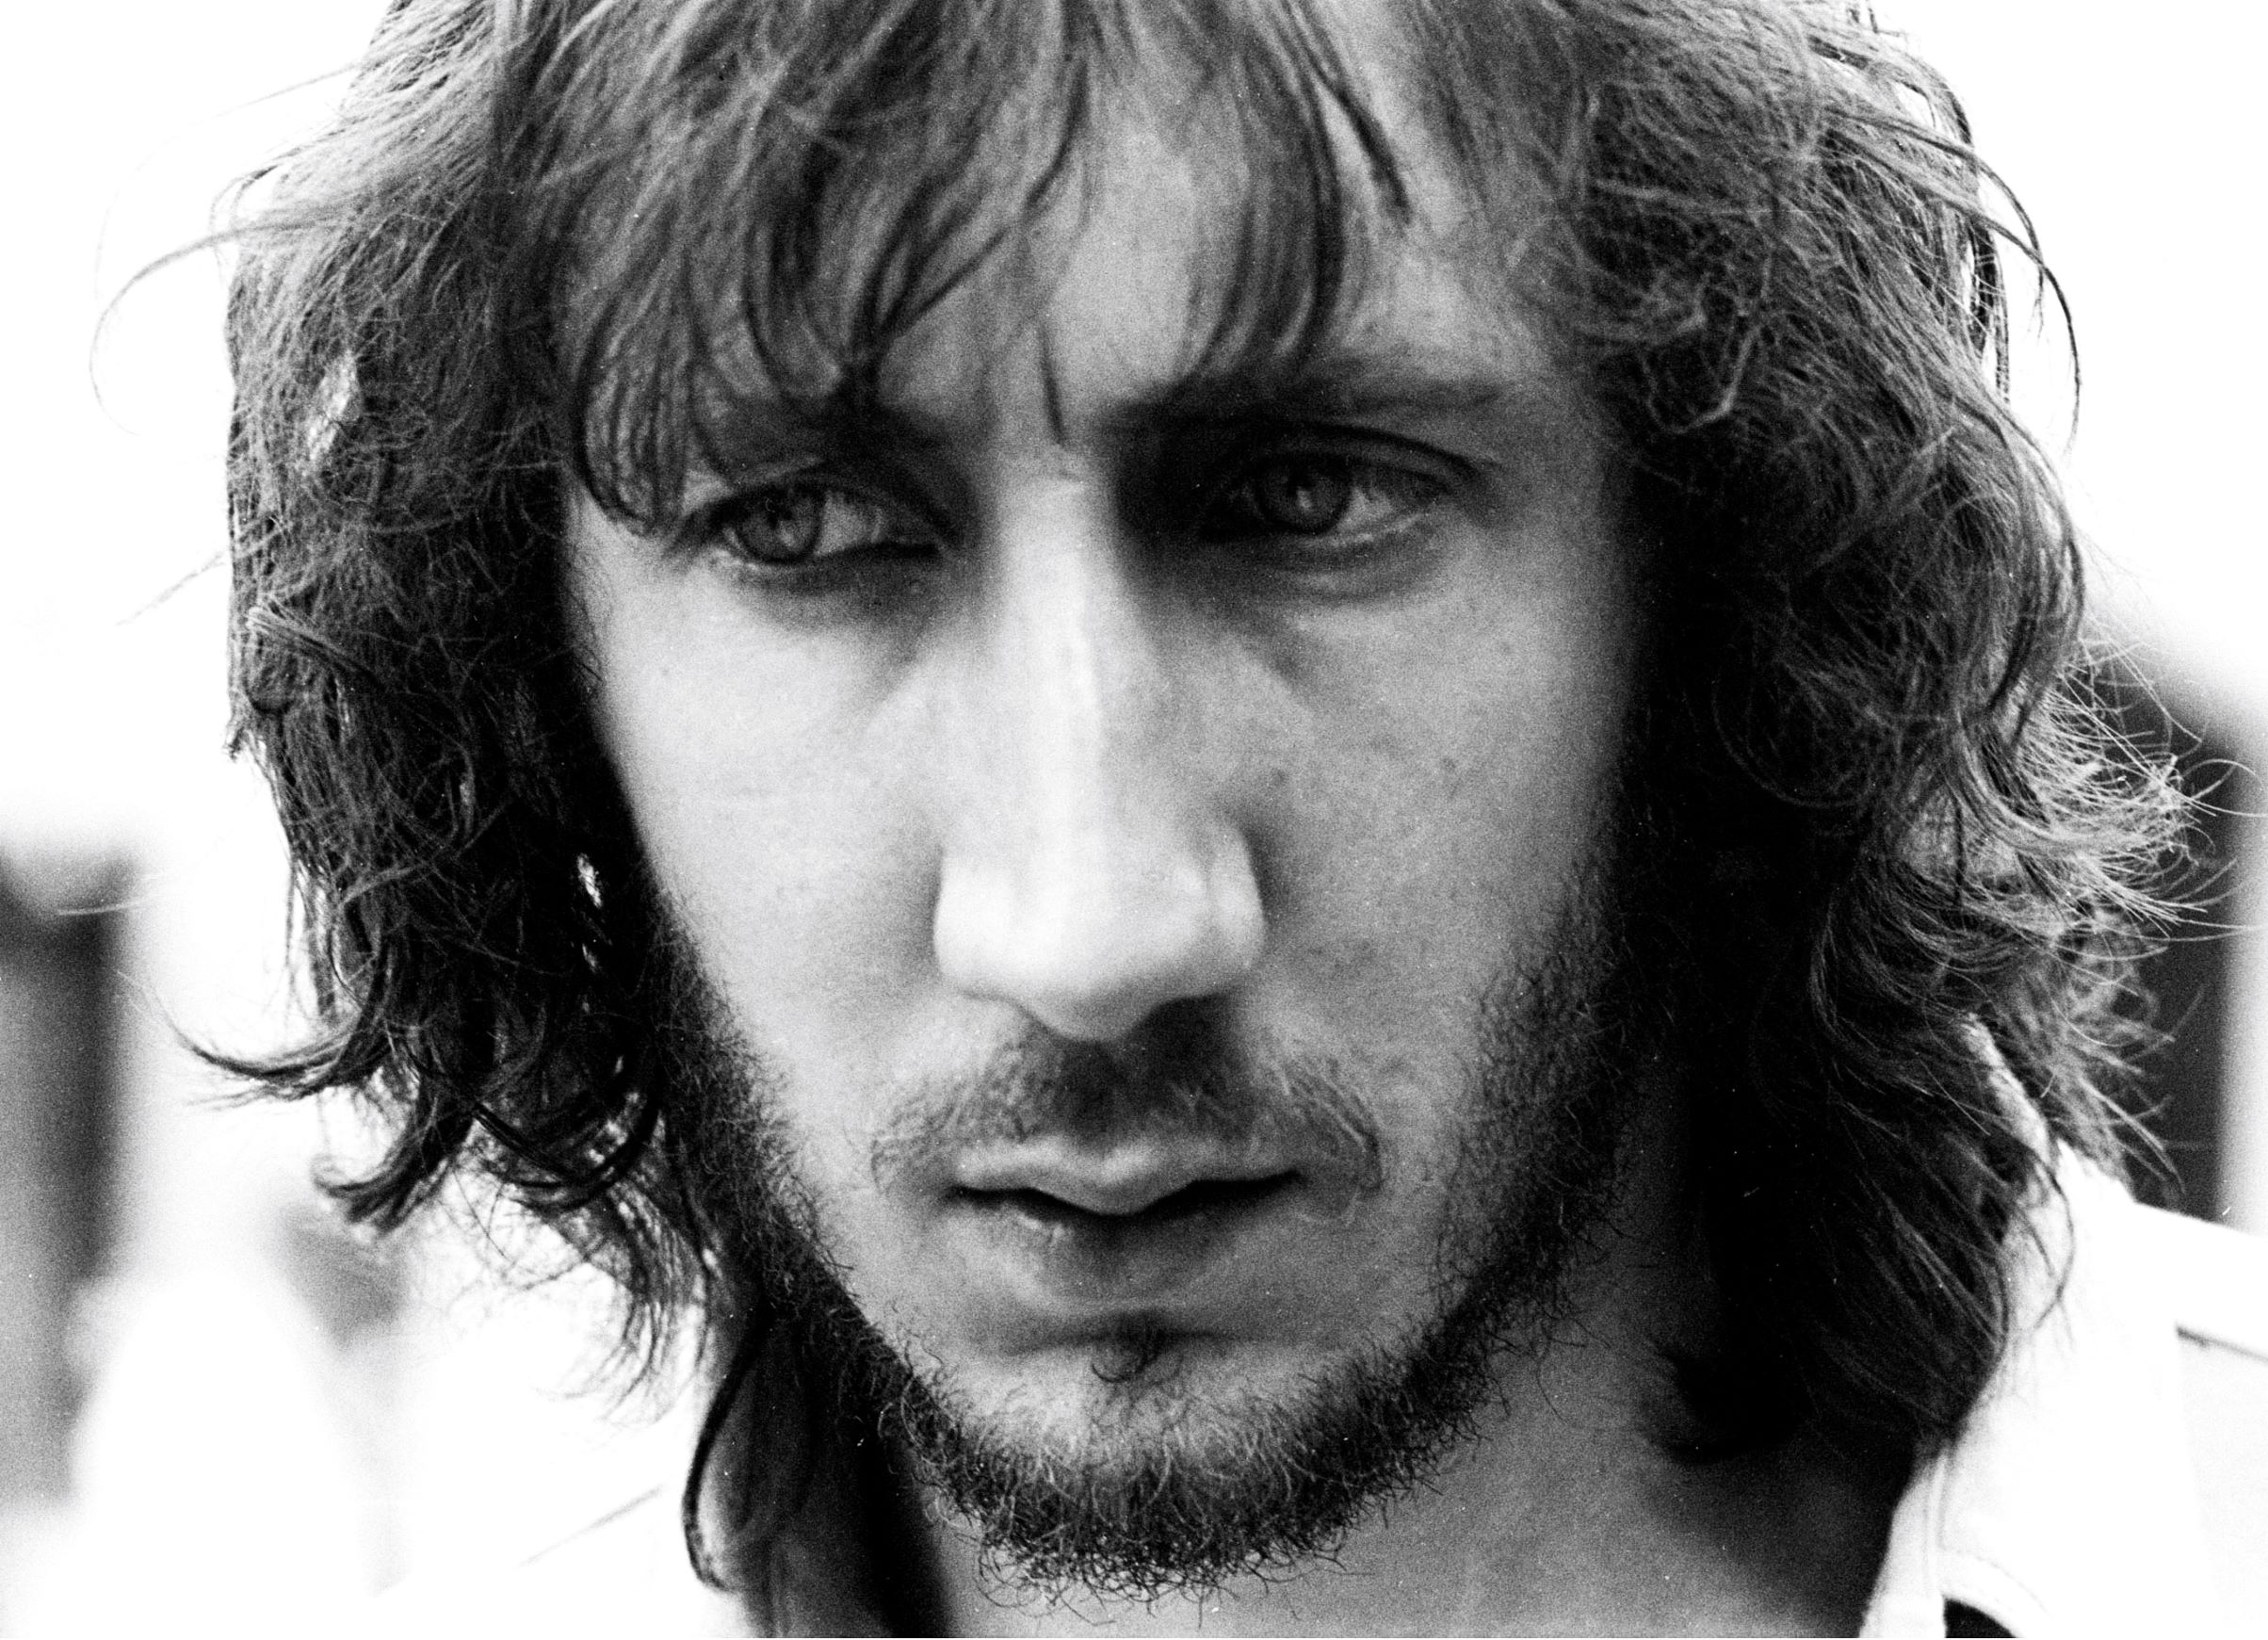 The Who's Pete Townshend with a beard